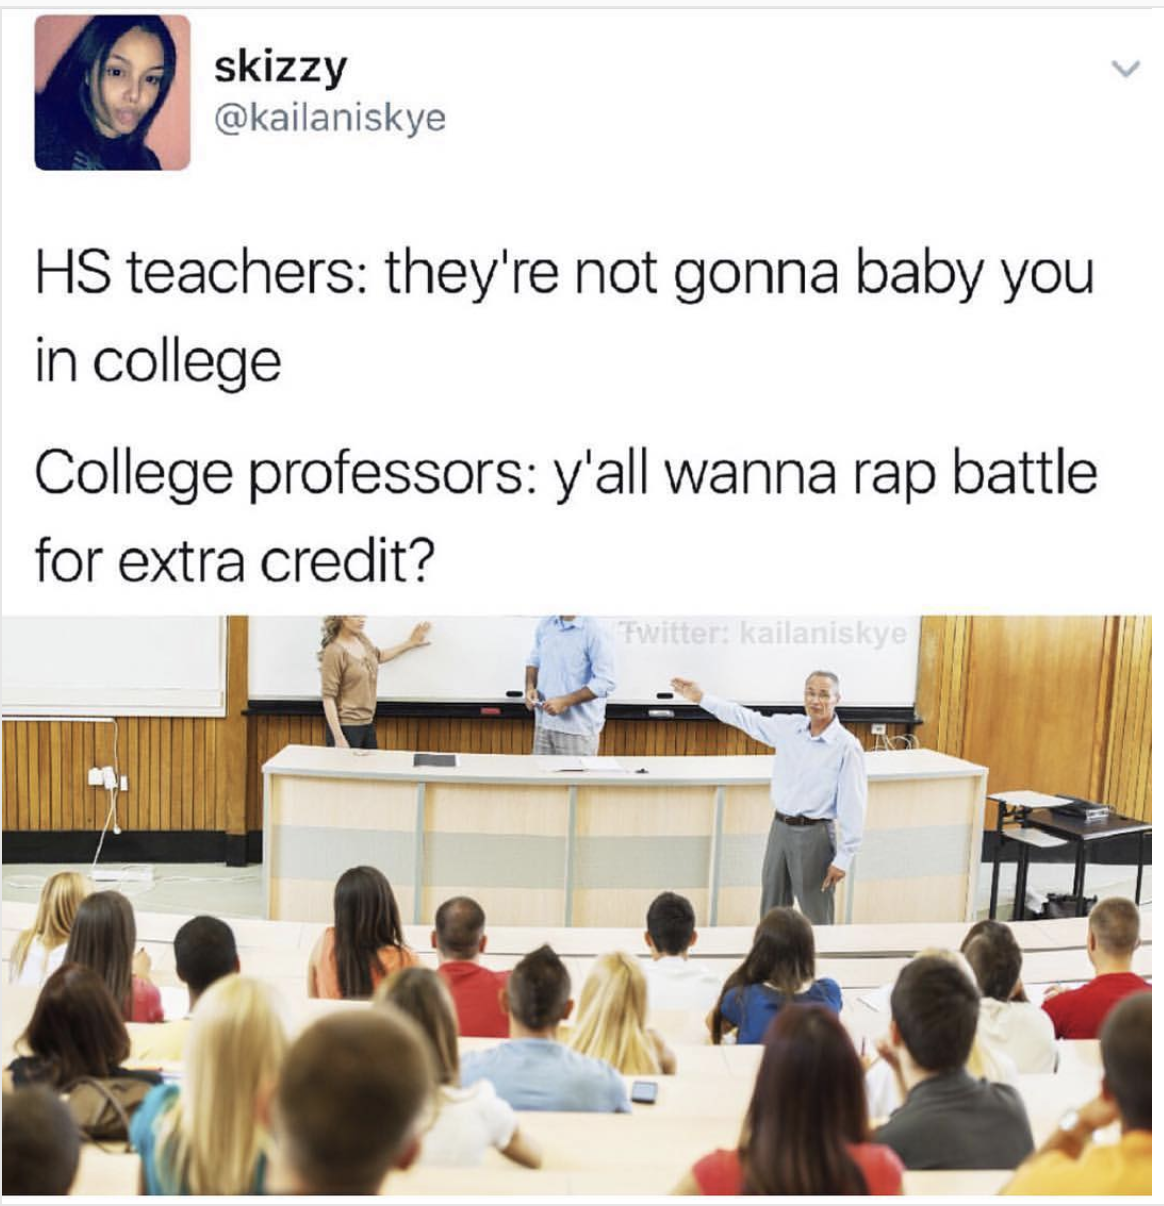 college extra credit meme - skizzy Hs teachers they're not gonna baby you in college College professors y'all wanna rap battle for extra credit?